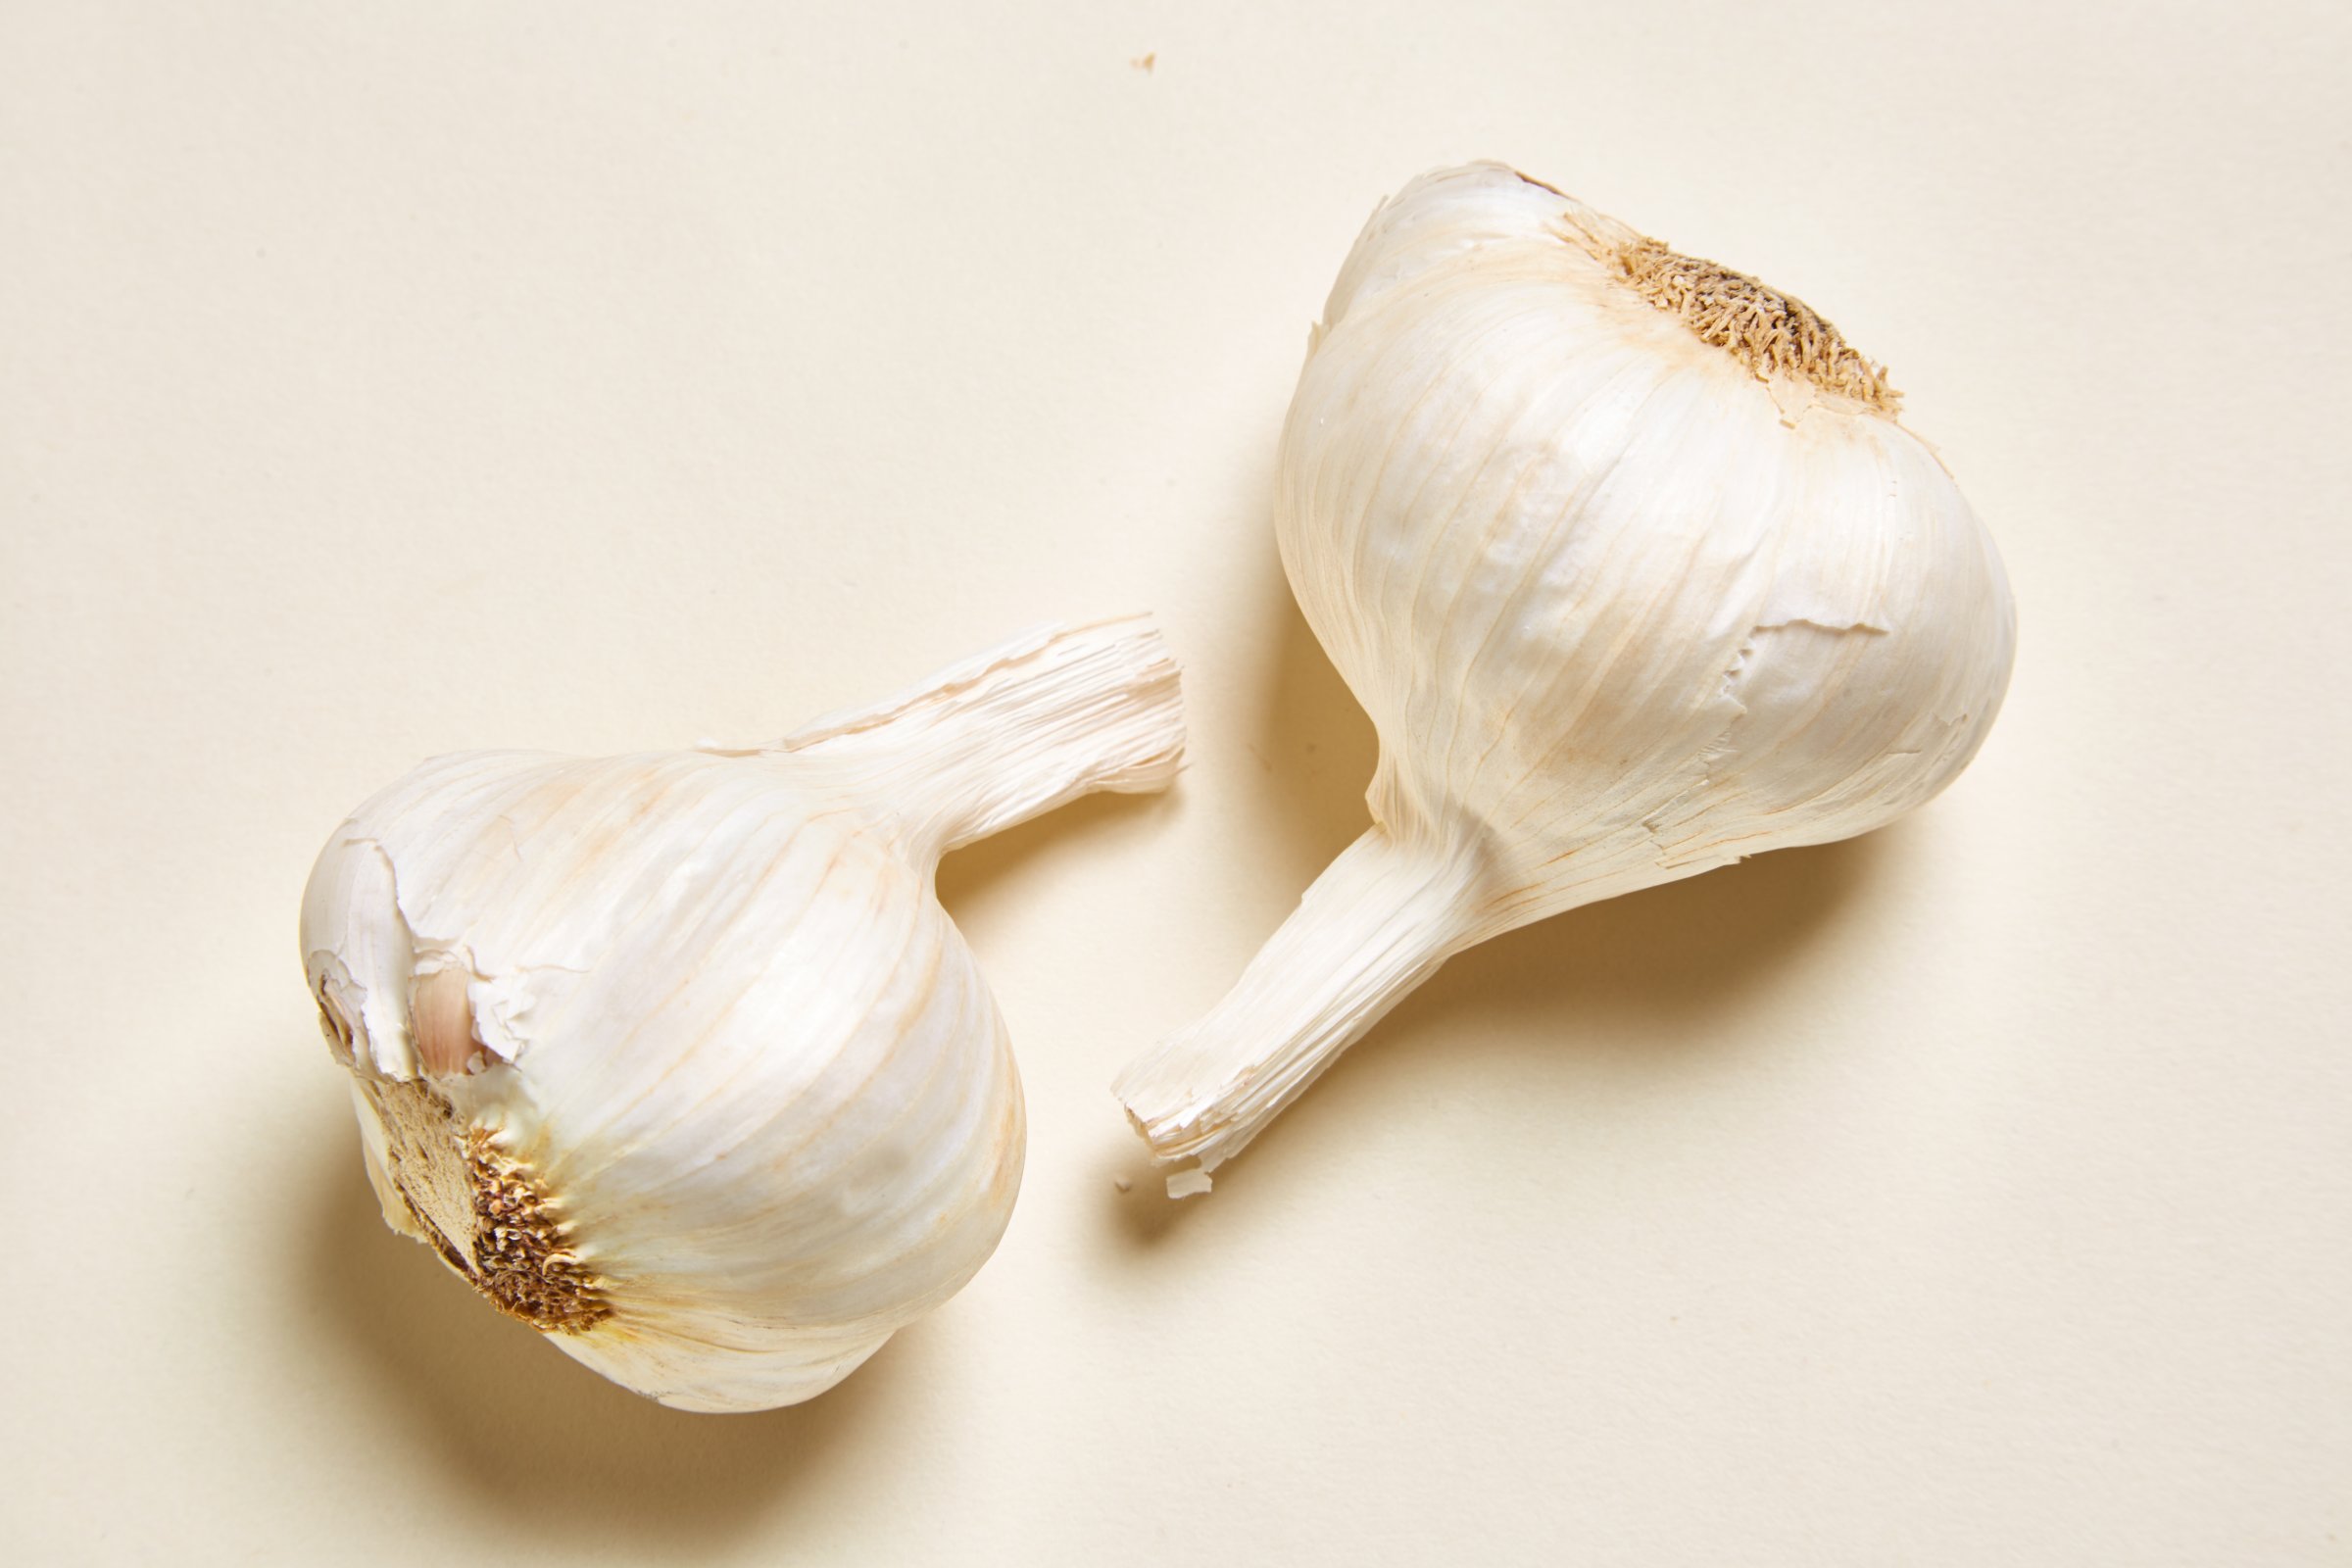 healthy and filling, health food, diet, nutrition, time.com stock, garlic